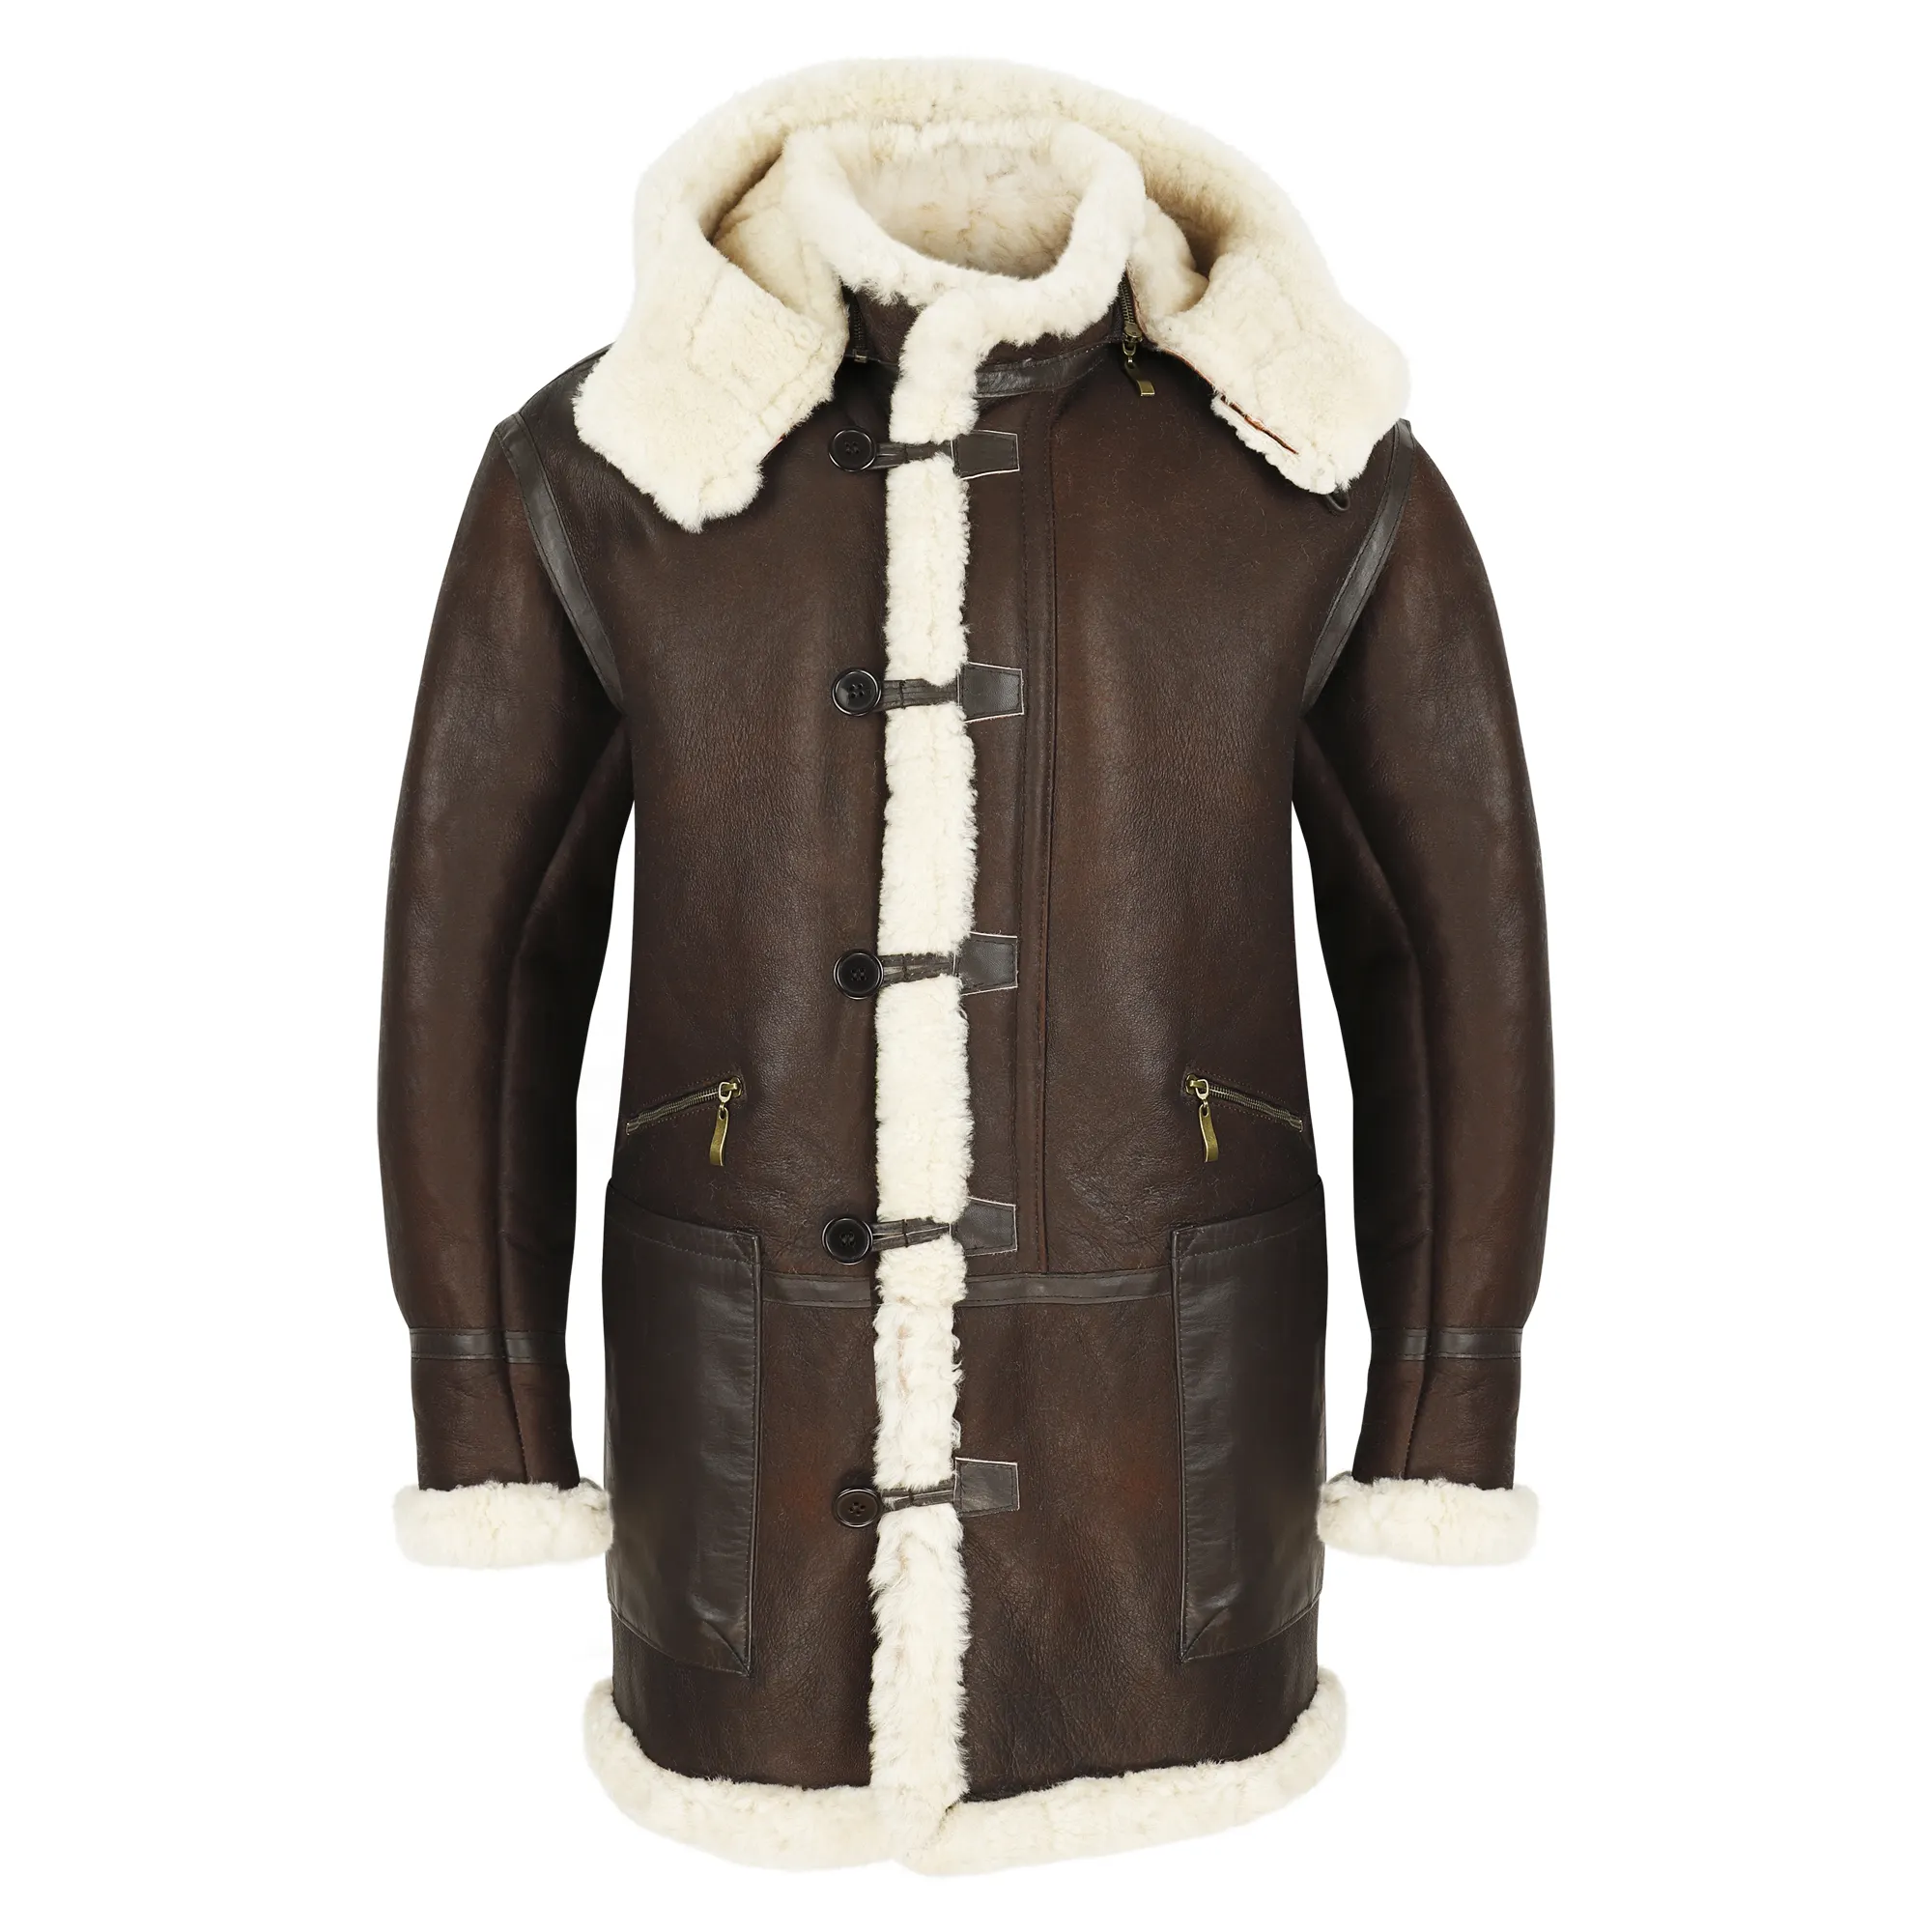 Men's Sheepskin Leather Coat Brown Long Fur Coat With Customized Design And 100% Quality Material